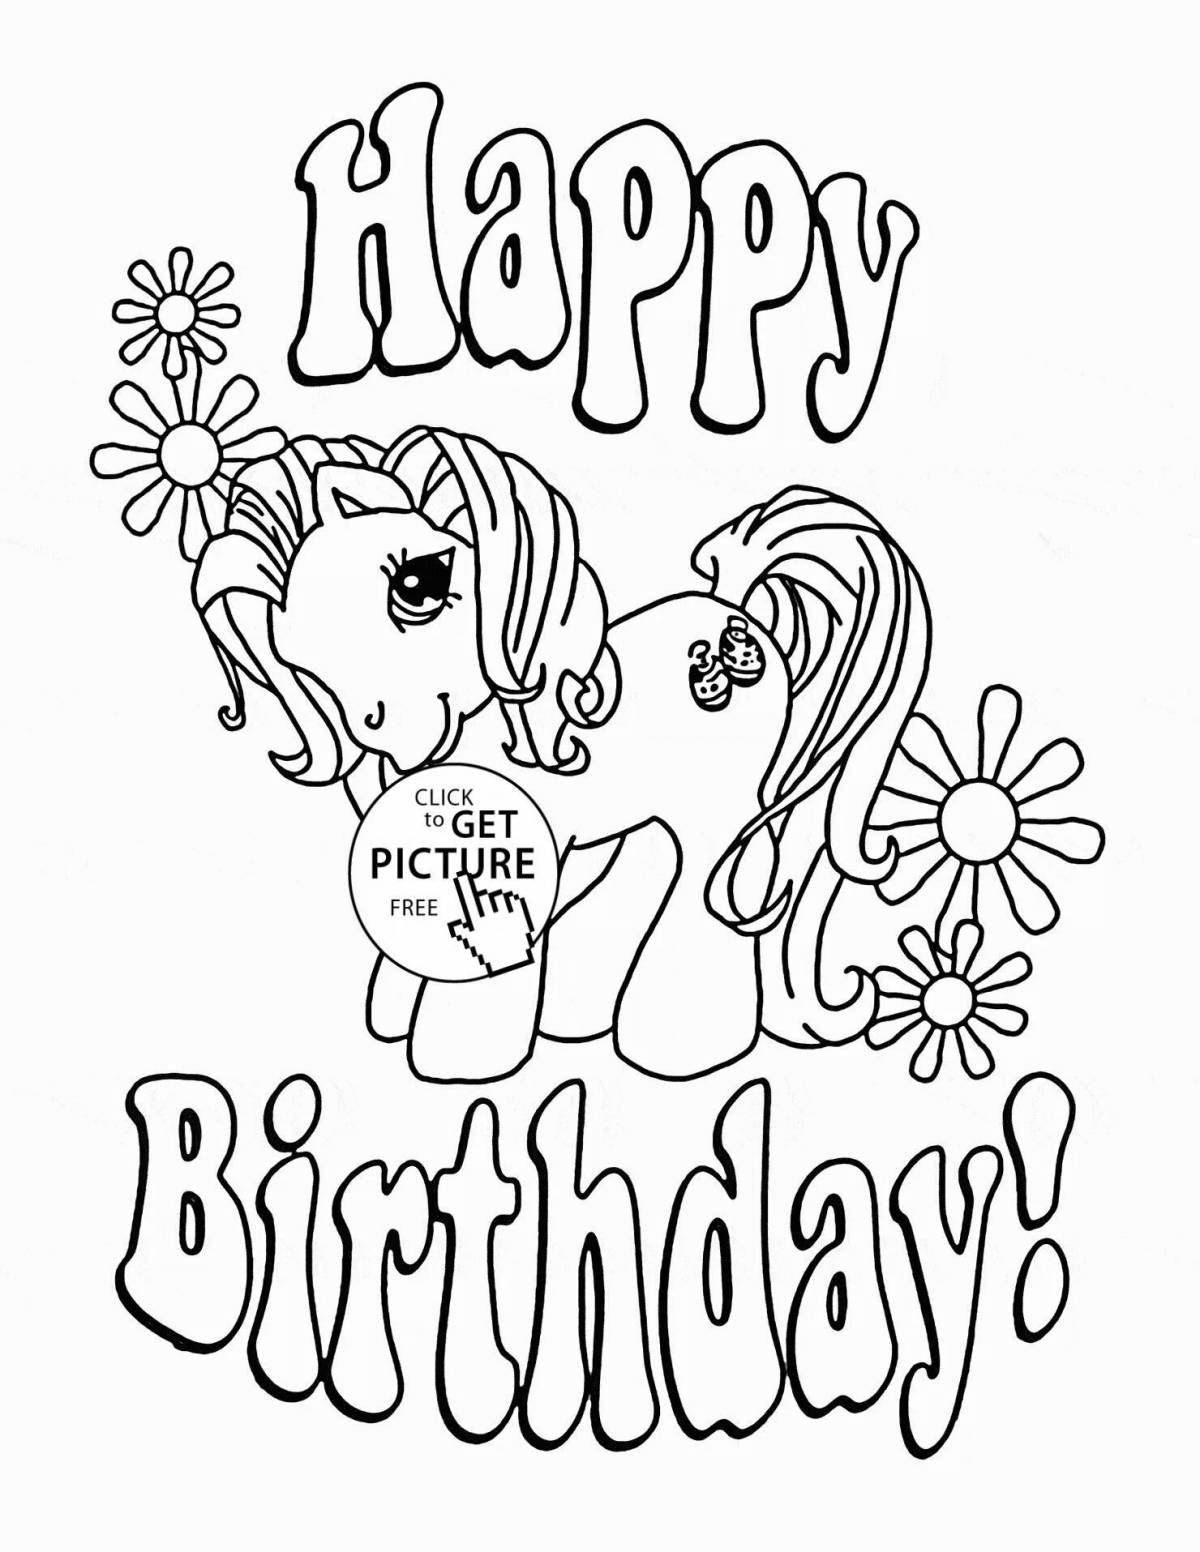 Colorful shiny happy birthday coloring page